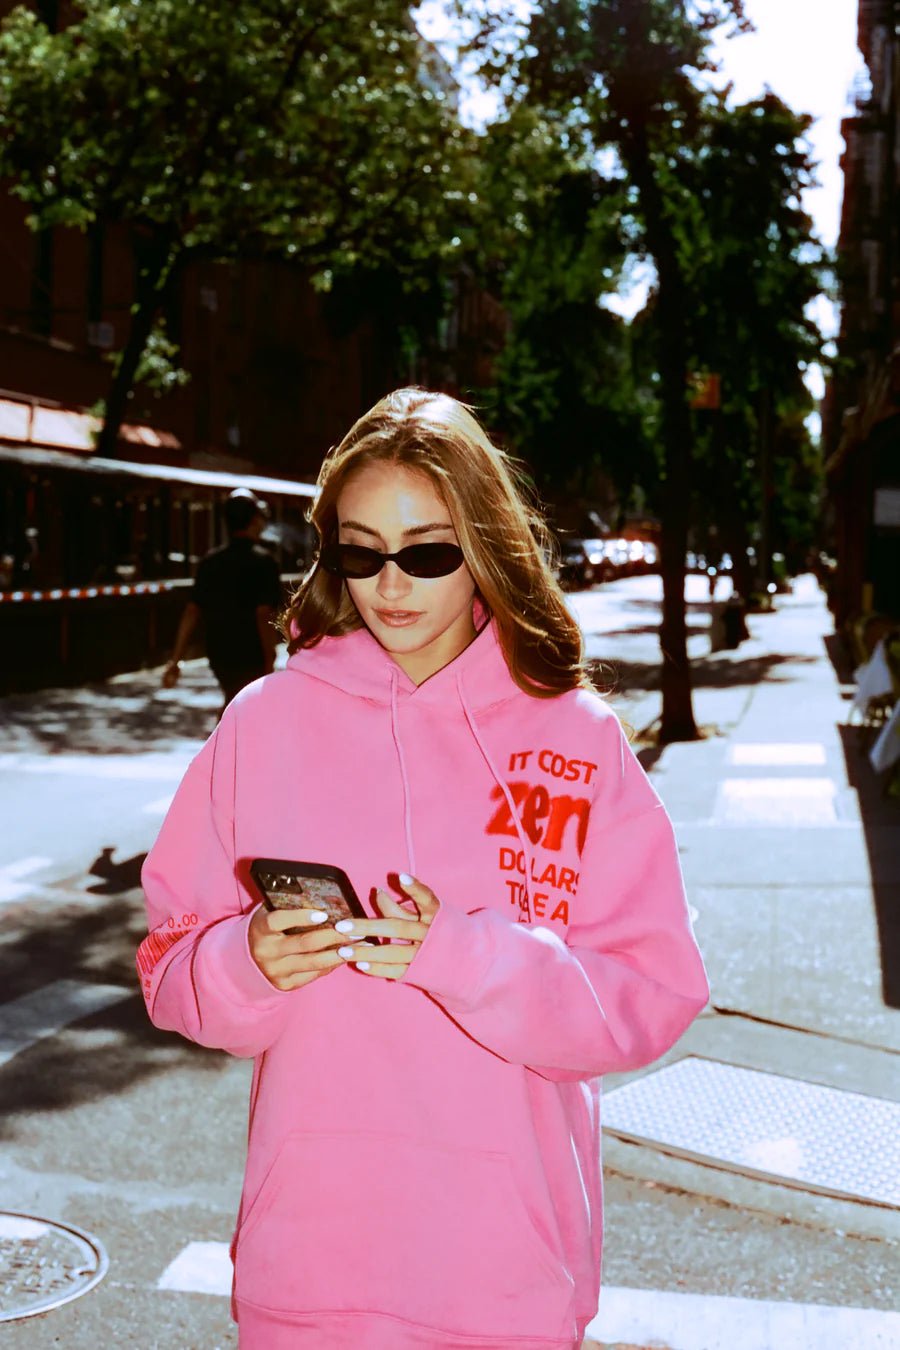 Shop Mayfair IT COSTS $0 TO BE A NICE PERSON Pink Hoodie - Premium Sweater from The Mayfair Group Online now at Spoiled Brat 